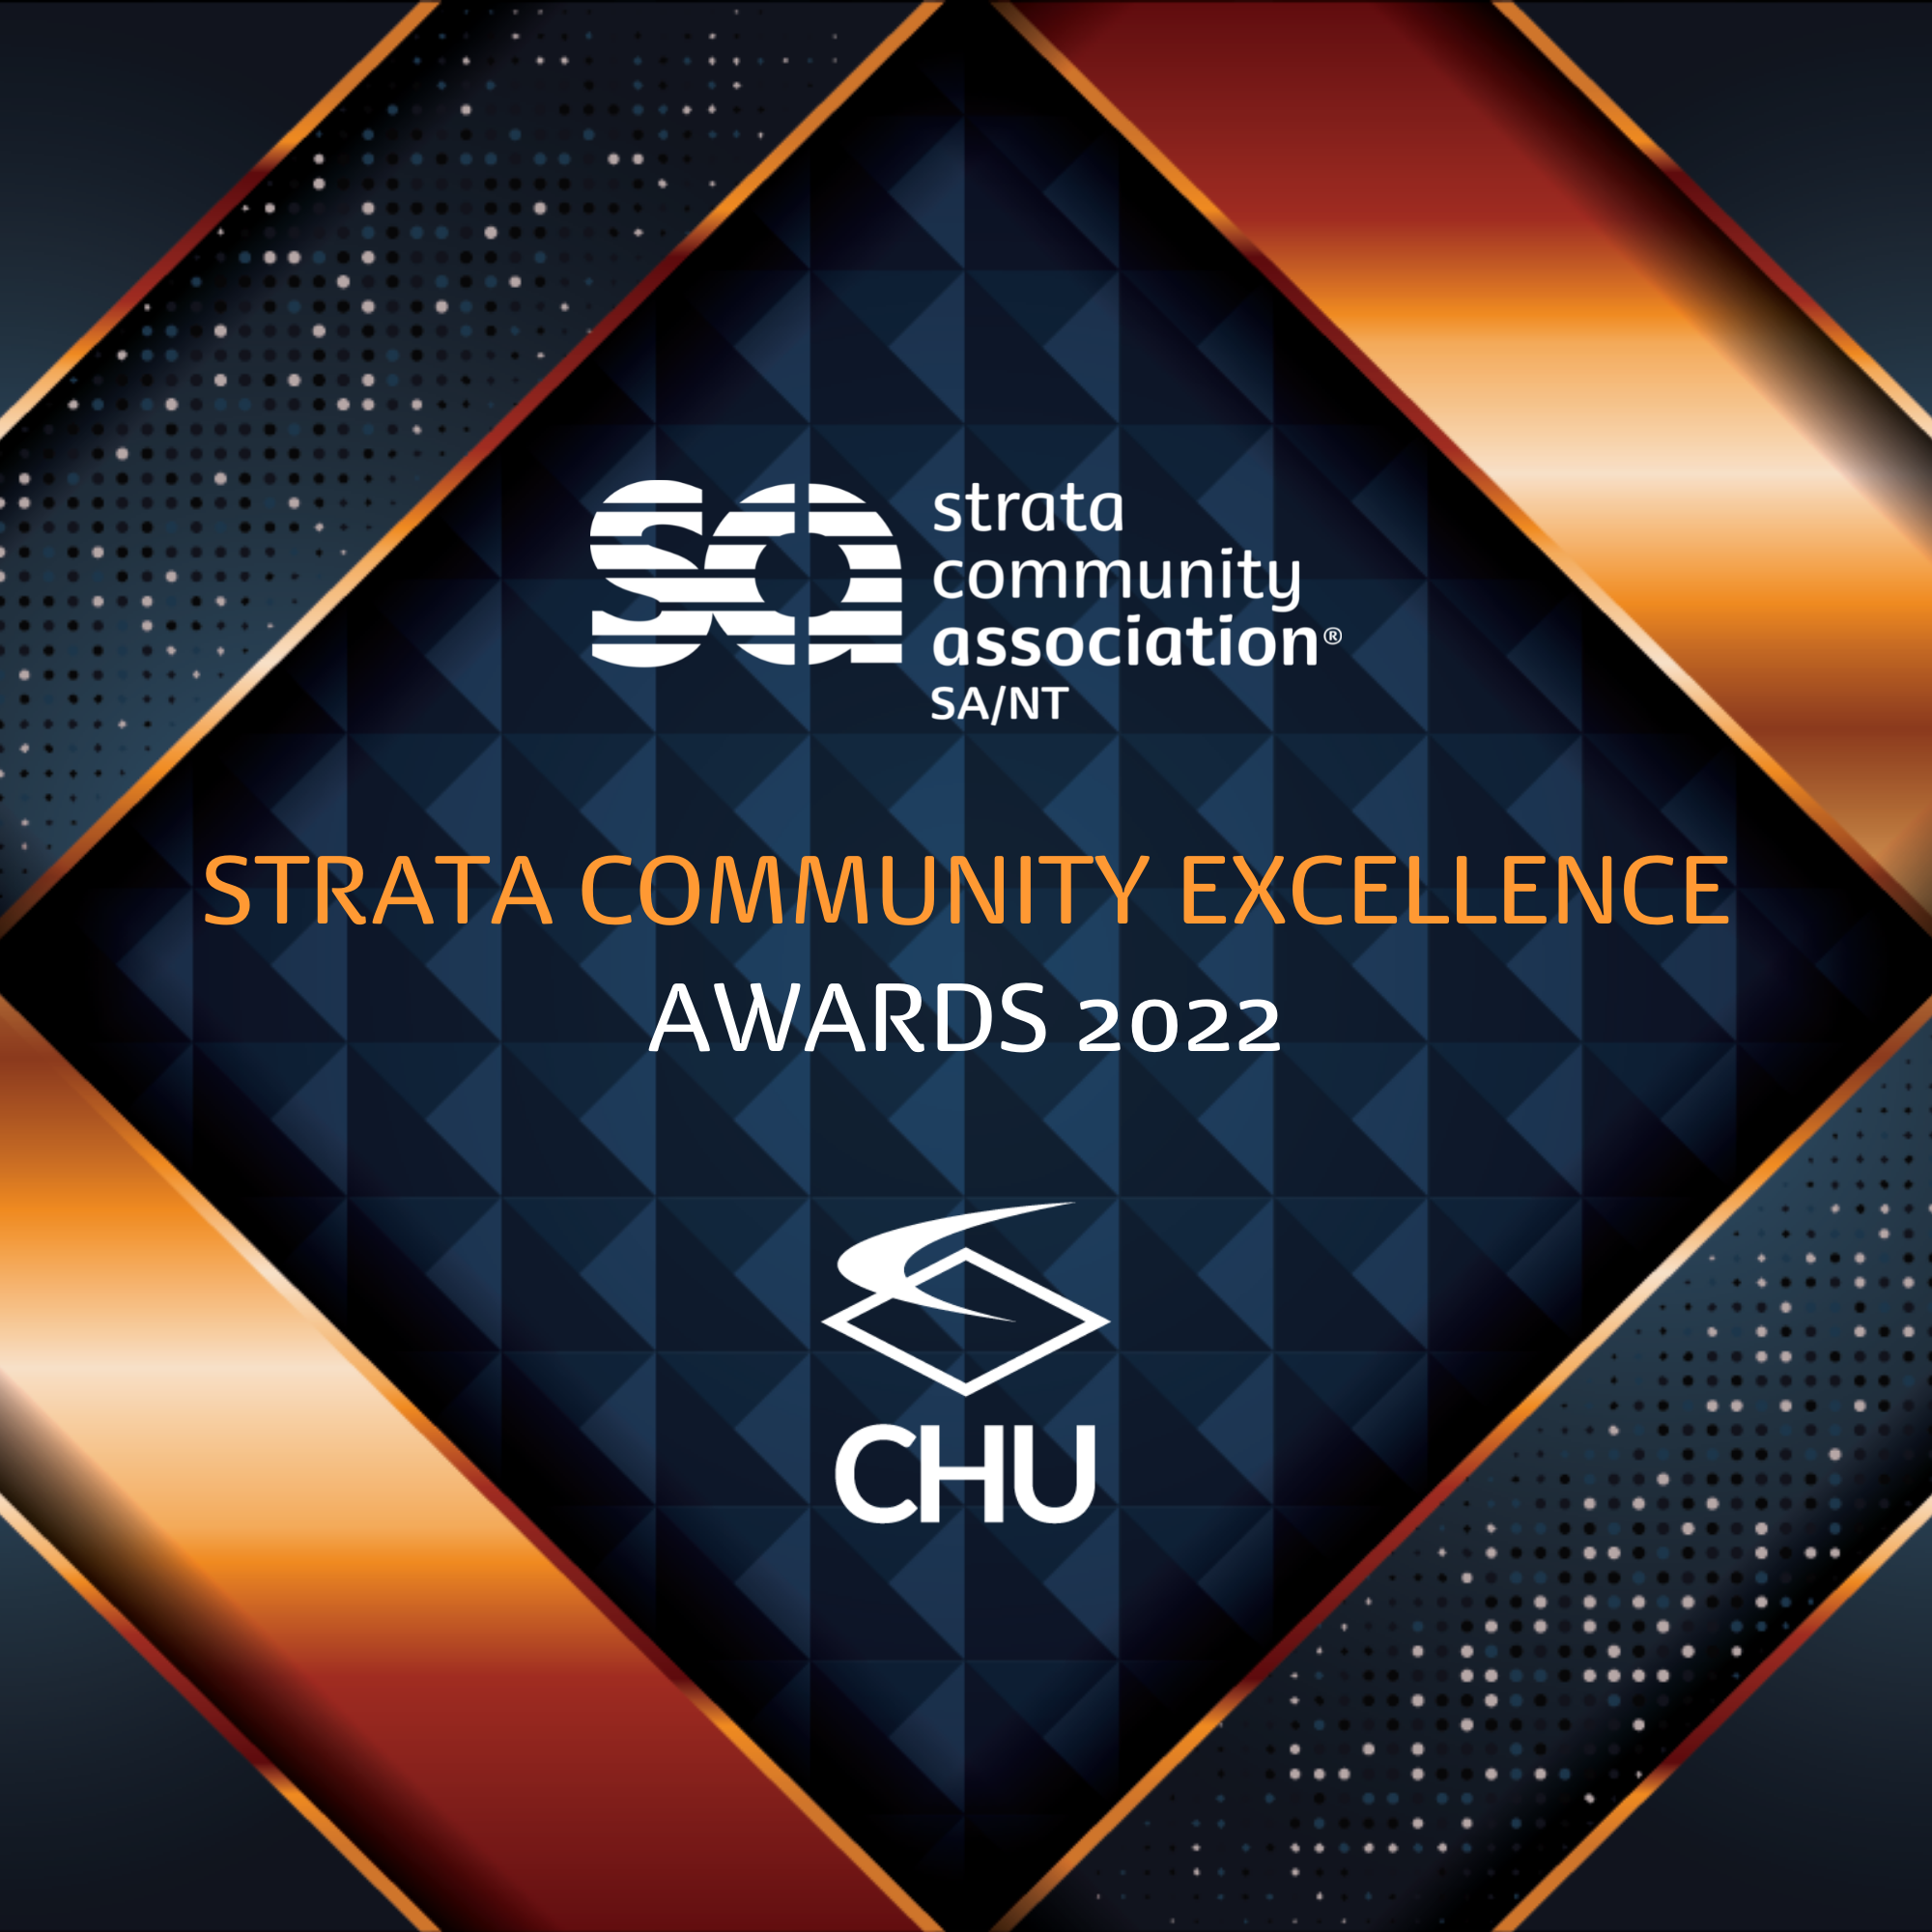 SCA (SA/NT) 2022 CHU Strata Community Awards for Excellence